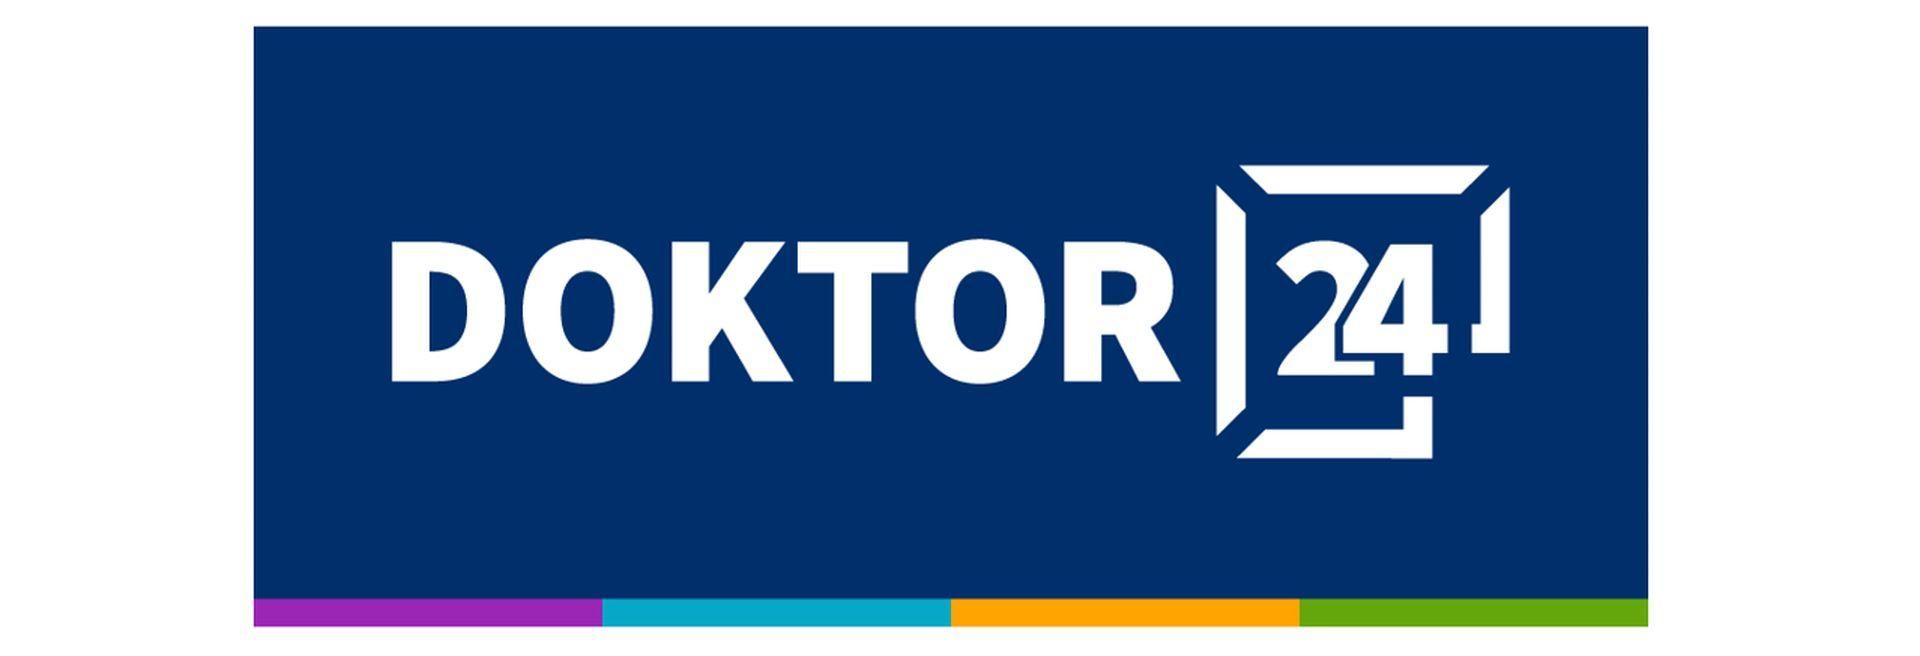 Doktor24 opened a new health centre in Budapest